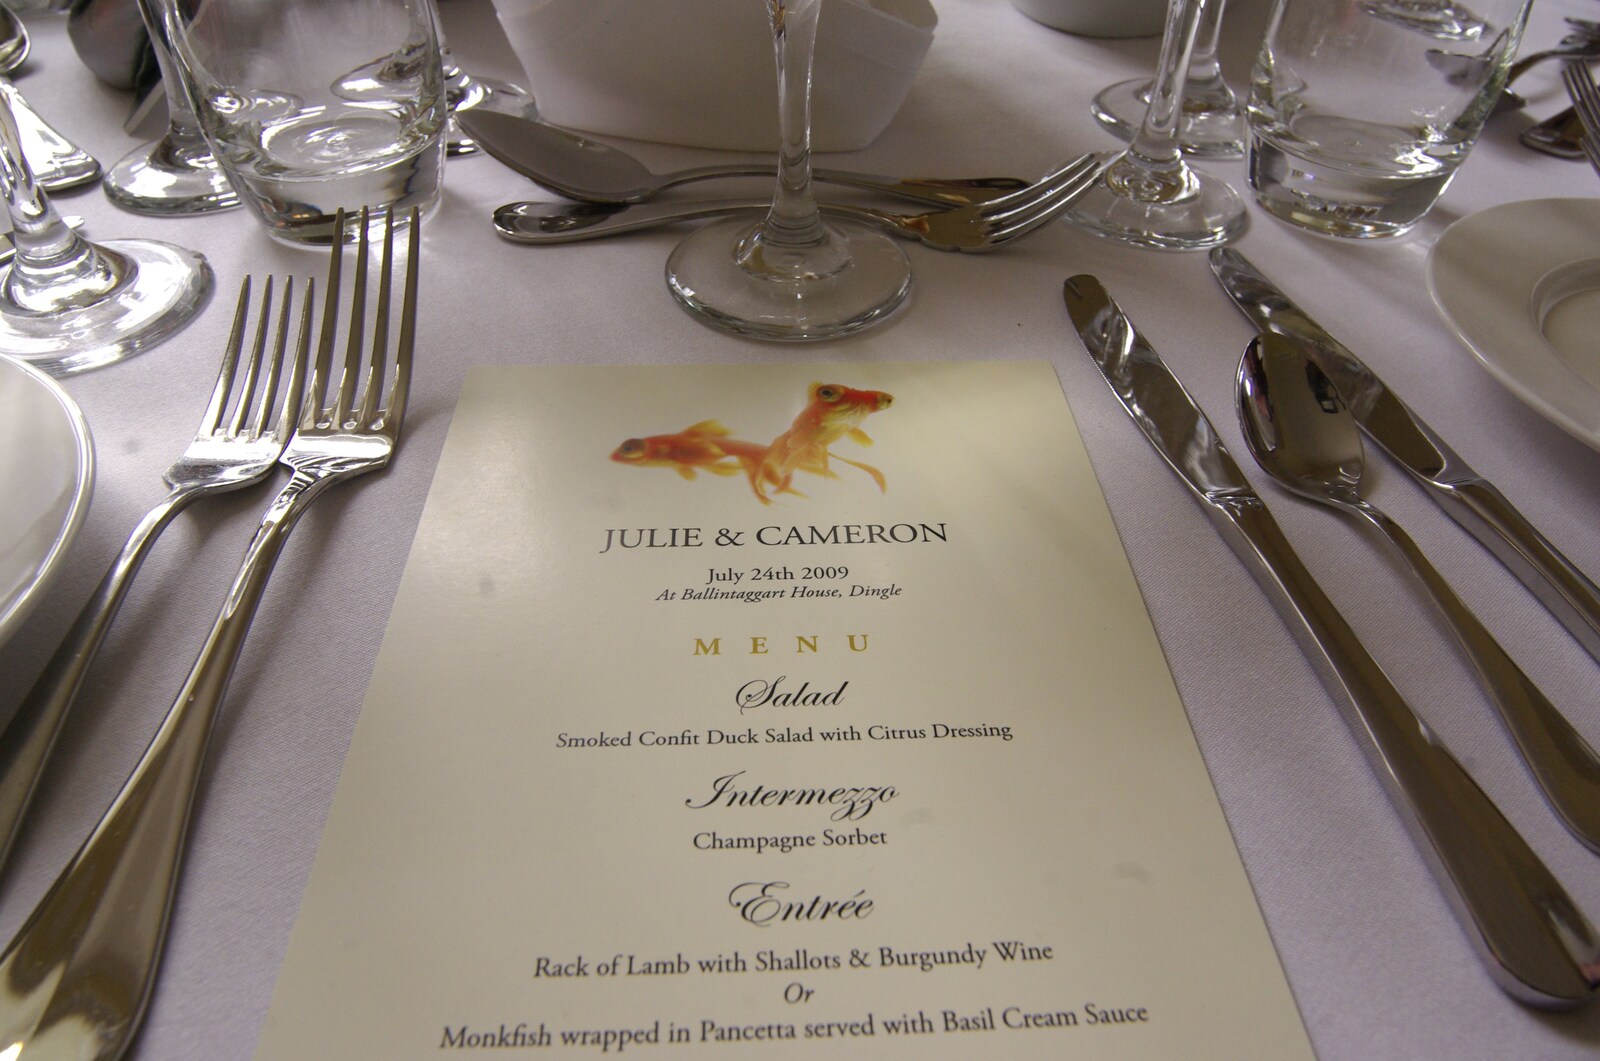 The wedding menu from Julie and Cameron's Wedding, Ballintaggart House, Dingle - 24th July 2009